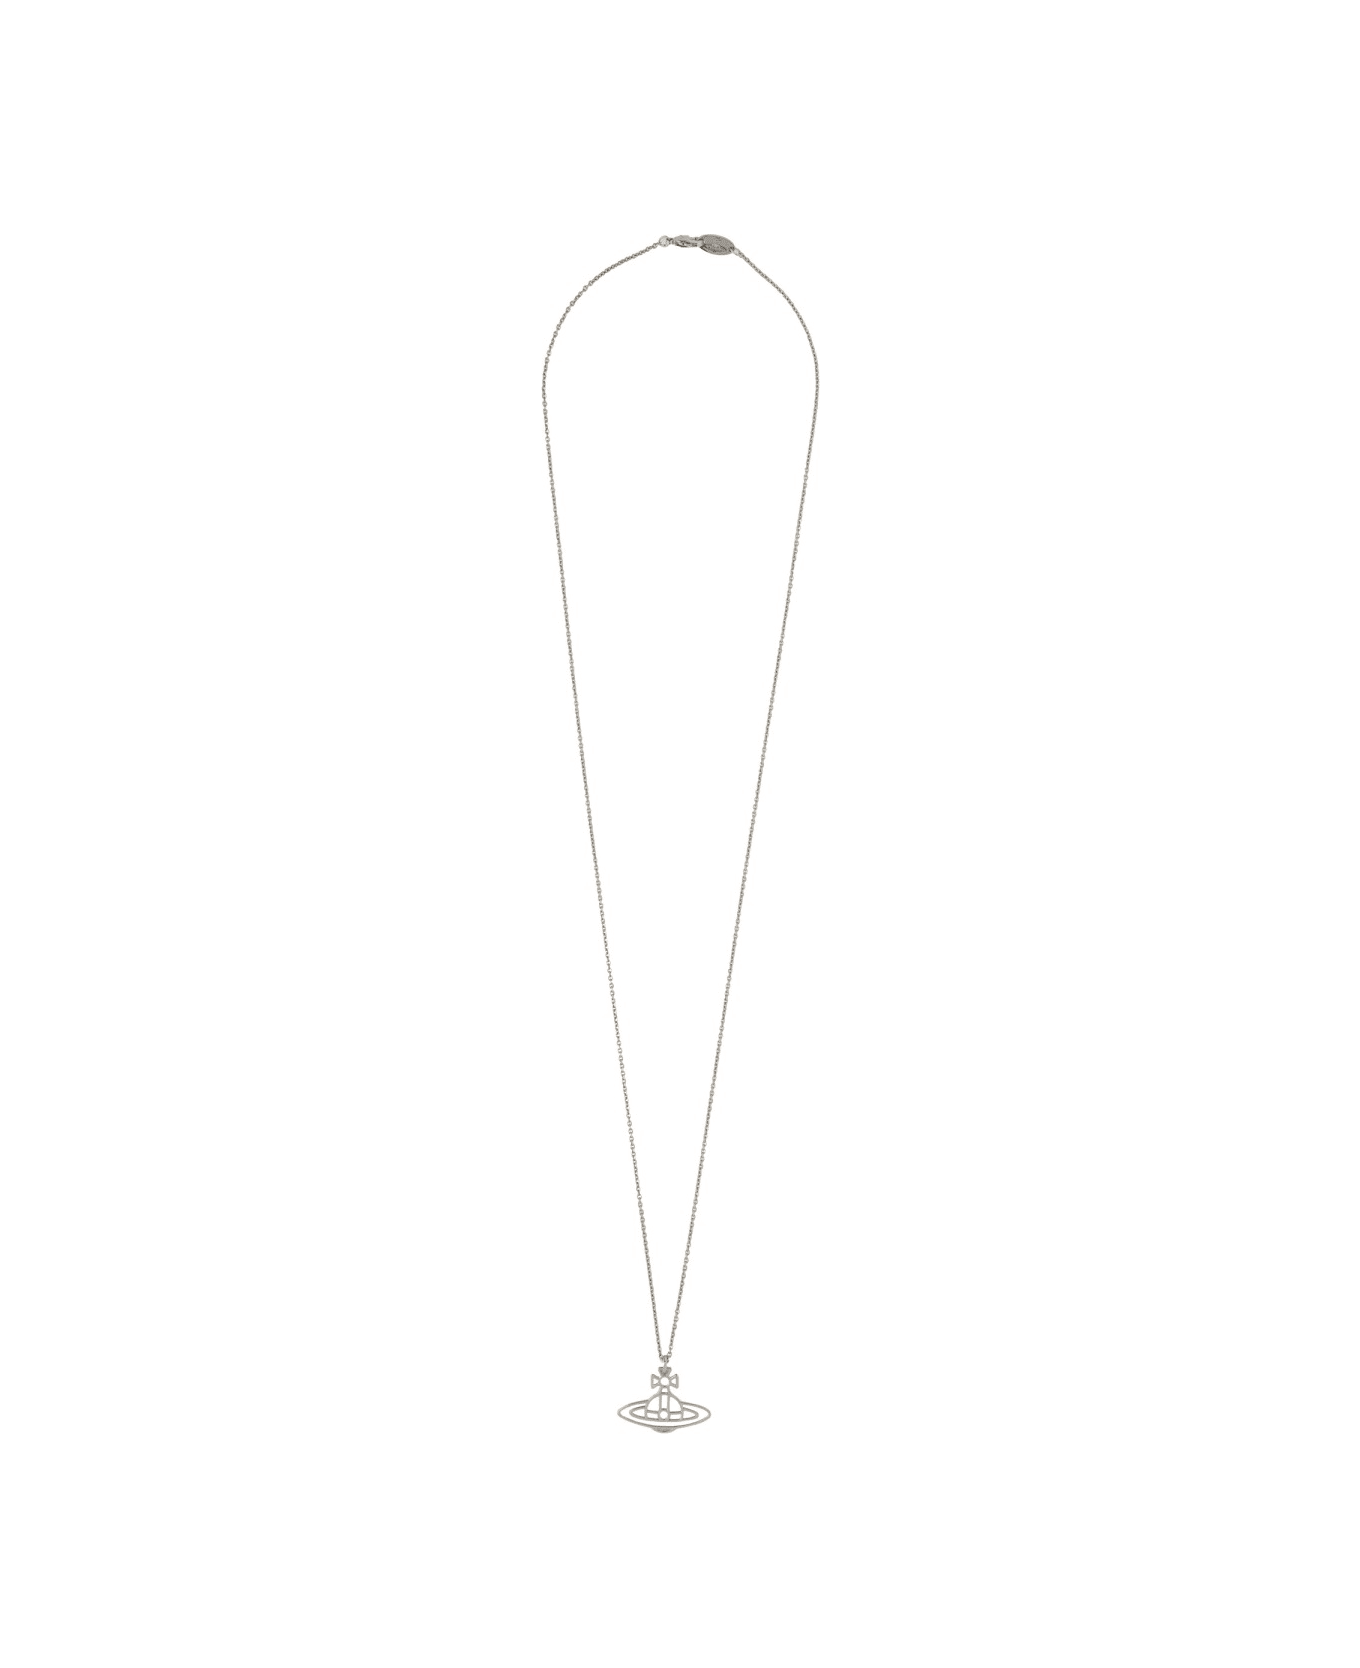 Vivienne Westwood Thin Necklace With Orb Pendant - SILVER